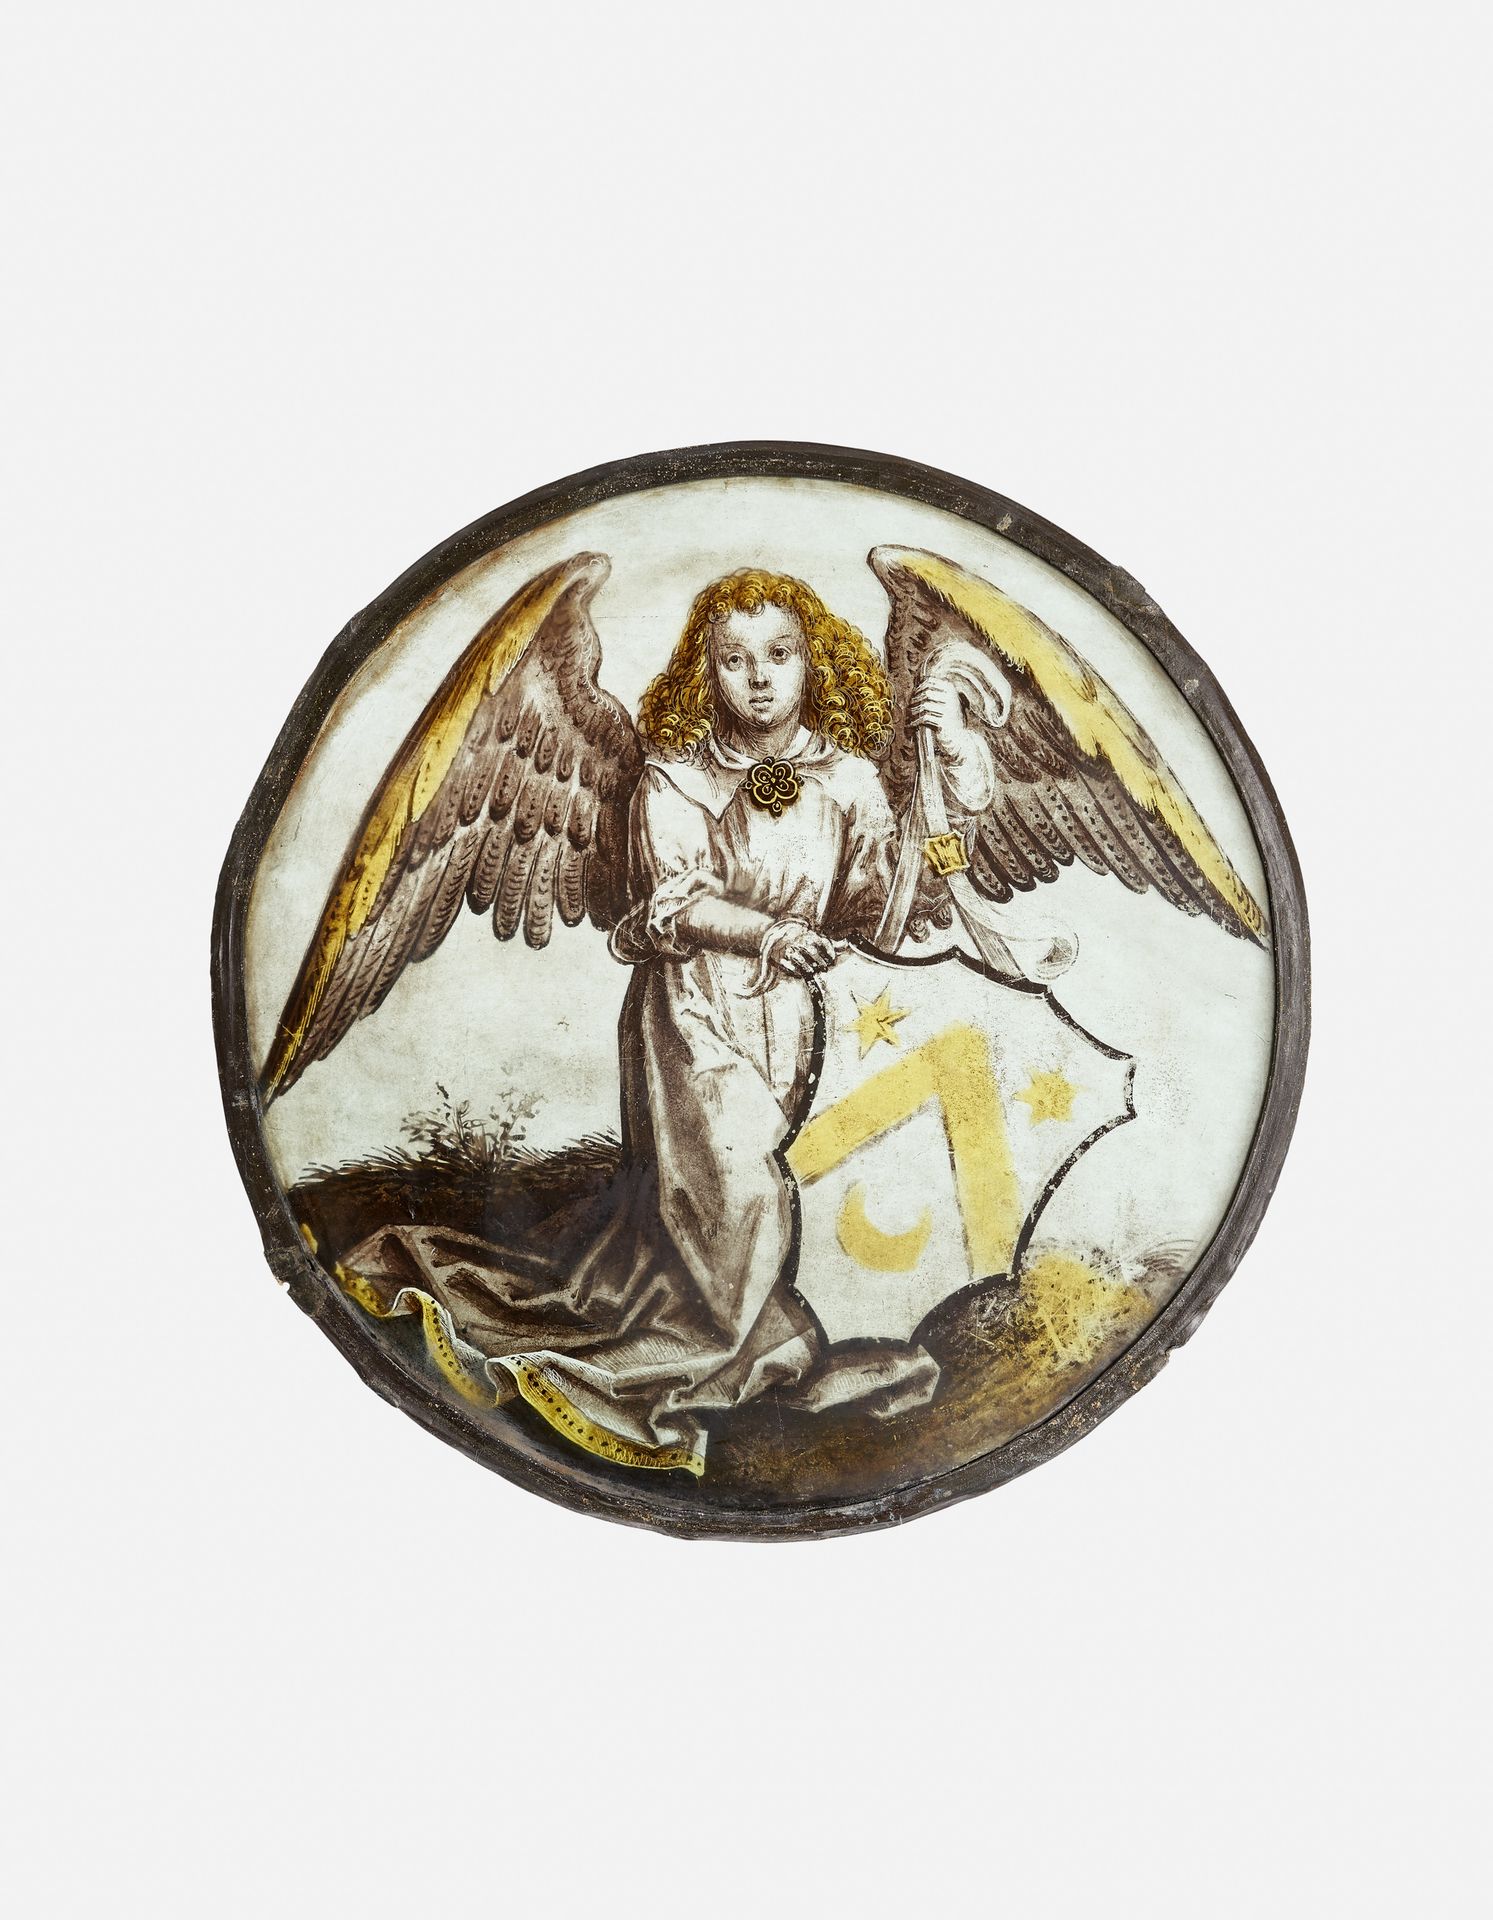 Null ROUNDEL

Southern Netherlands, Bruges?, 15th century 

In jaune d'argent, d&hellip;